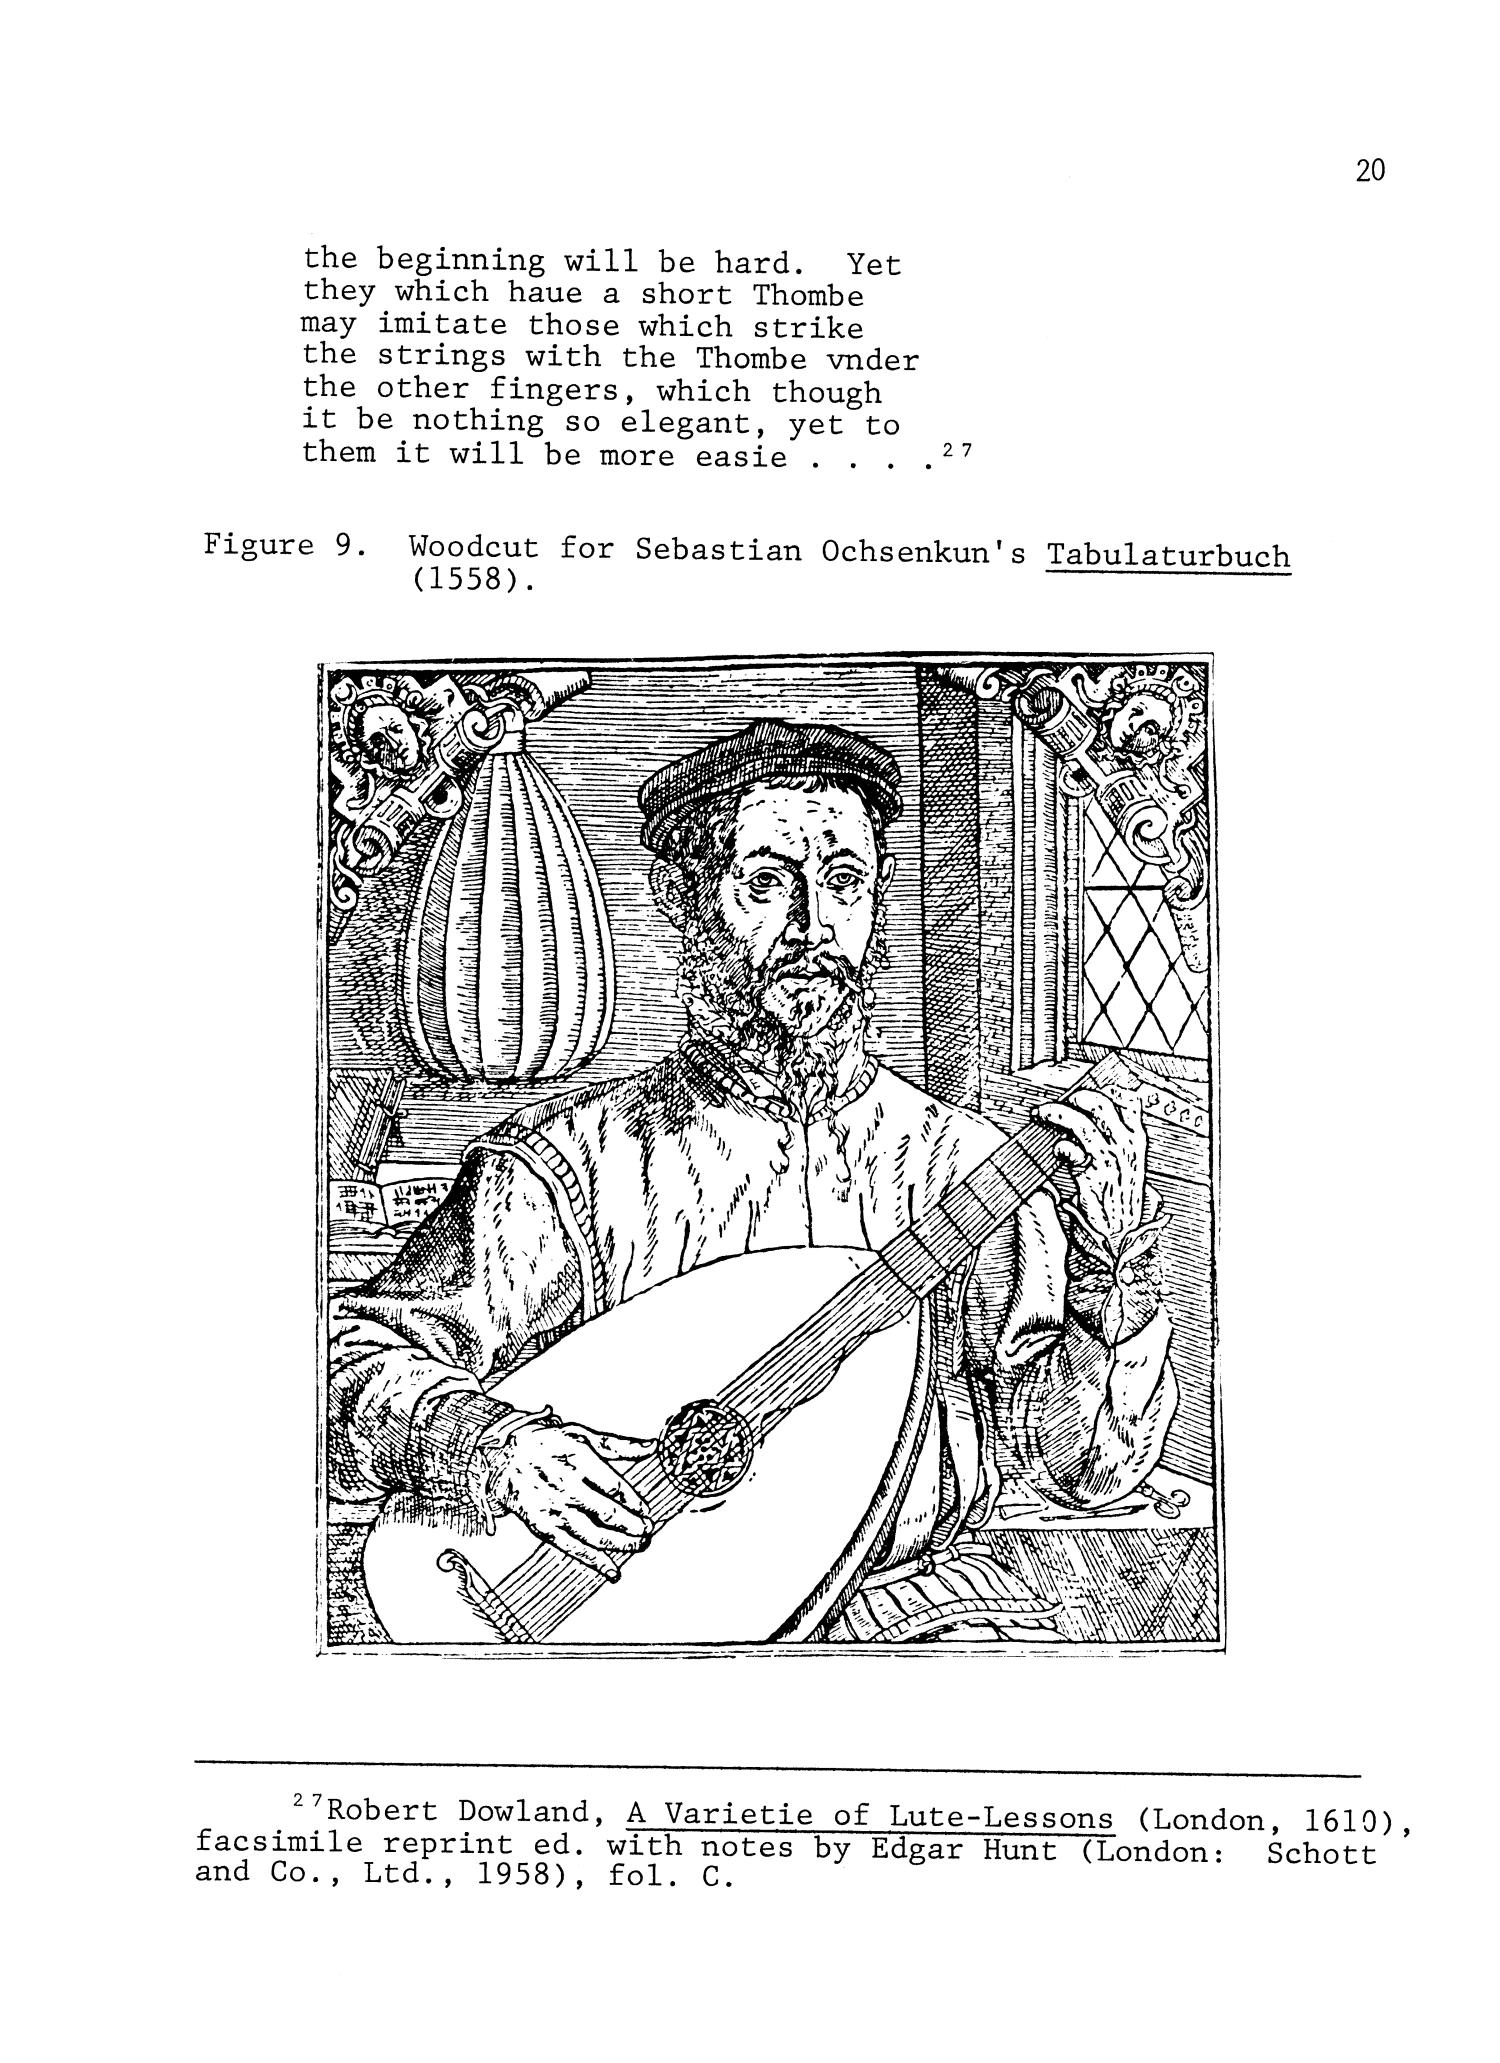 Right Hand Lute Technique In The Sixteenth Century A Lecture Recital Together With Three Recitals Of Selected Works Of F Moreno Torroba J Dowland J S Bach P Attaignant V Capirola And Others